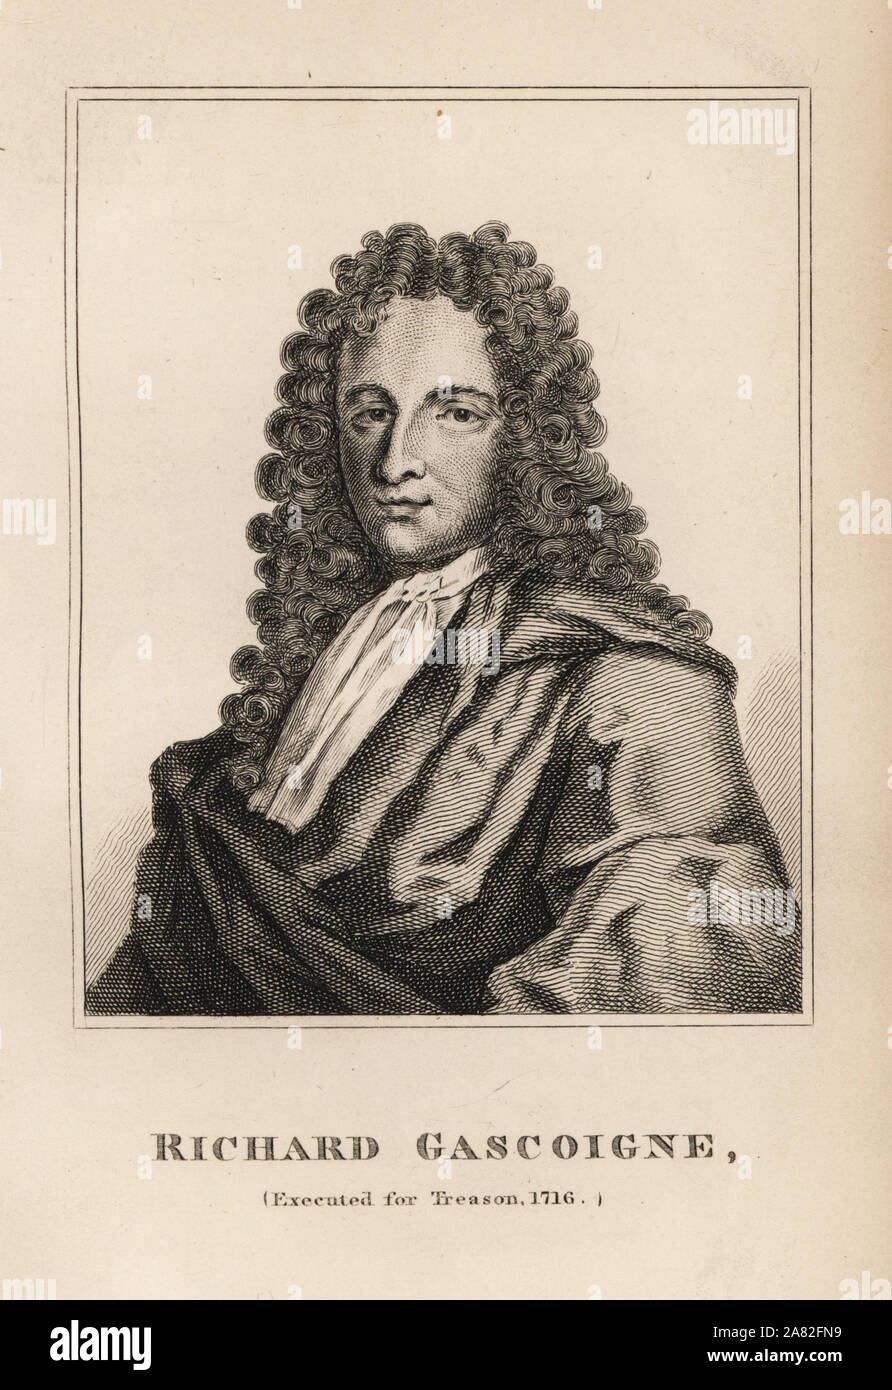 Richard Gascoigne, rebel executed for treason at Tyburn, 1716. Engraving from James Caulfield's Portraits, Memoirs and Characters of Remarkable Persons, London, 1819. Stock Photo